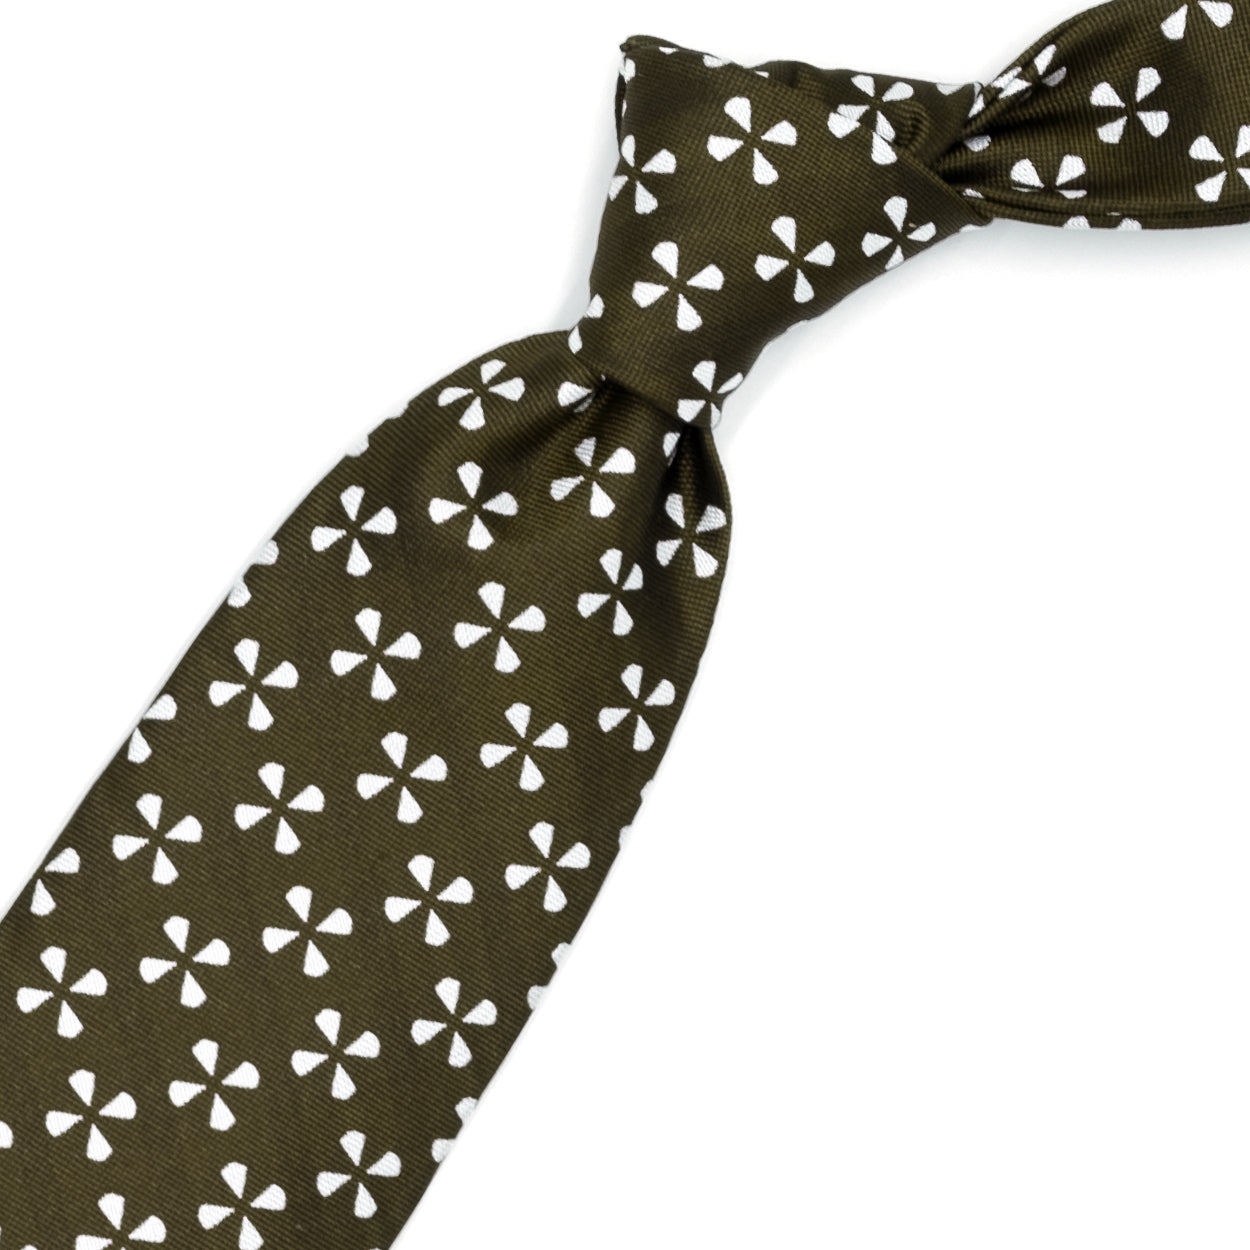 Brown tie with white propellers